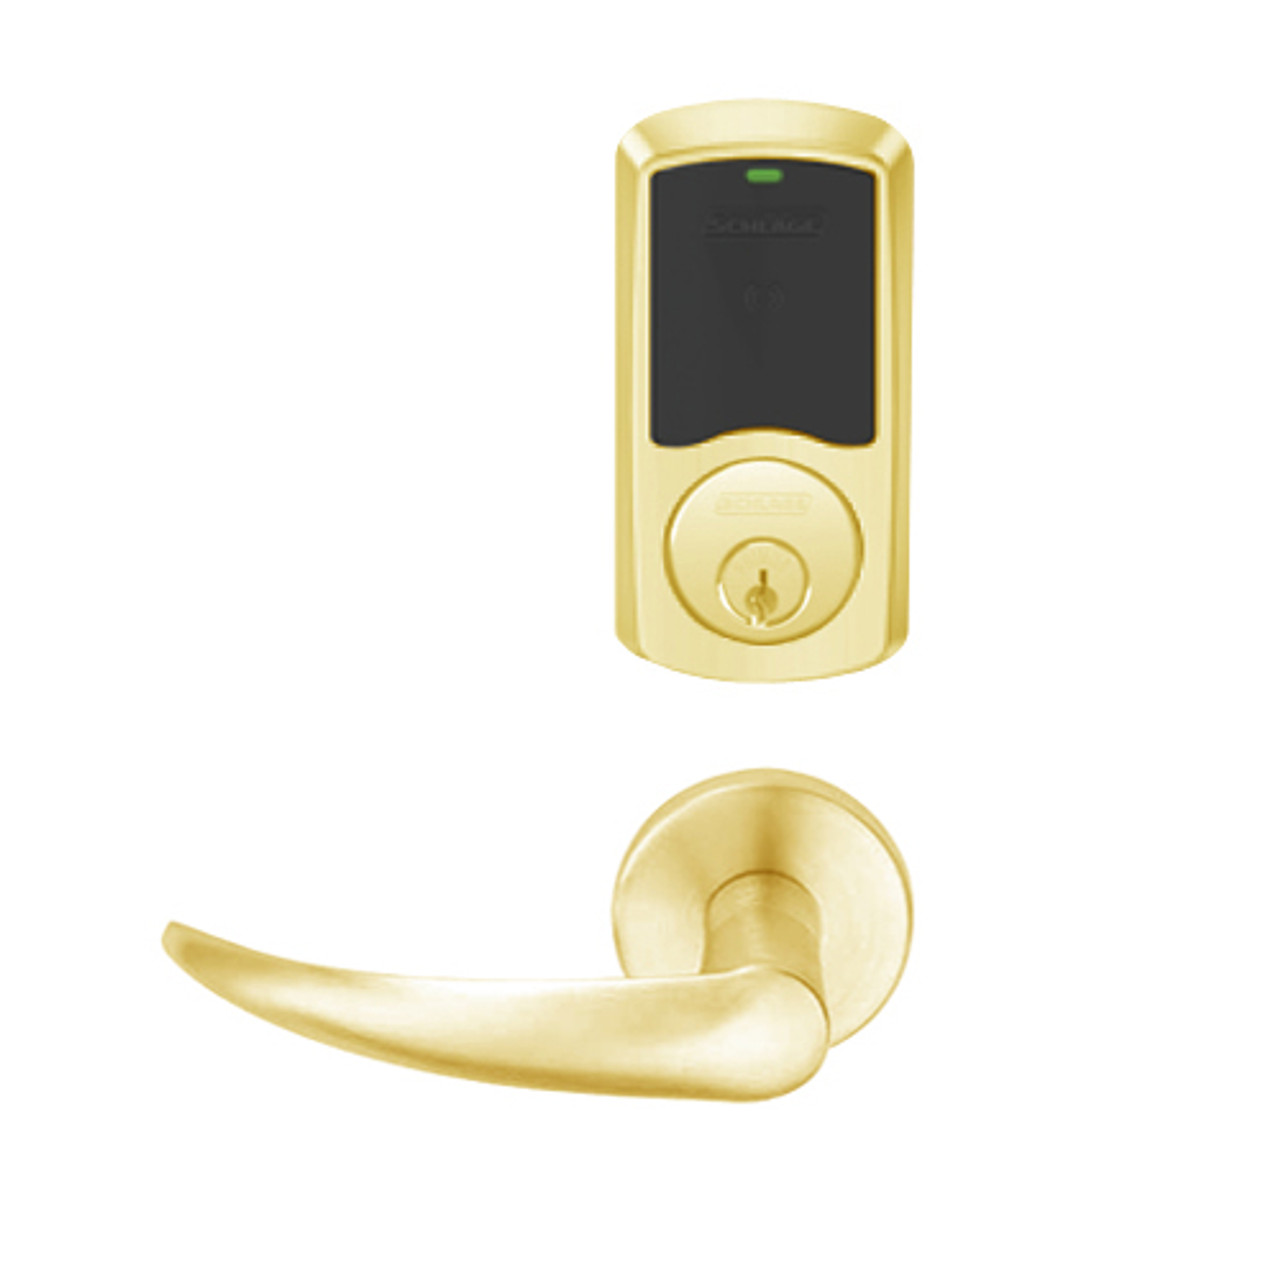 LEMD-GRW-P-OME-605-00C Schlage Privacy/Apartment Wireless Greenwich Mortise Deadbolt Lock with LED and Omega Lever in Bright Brass